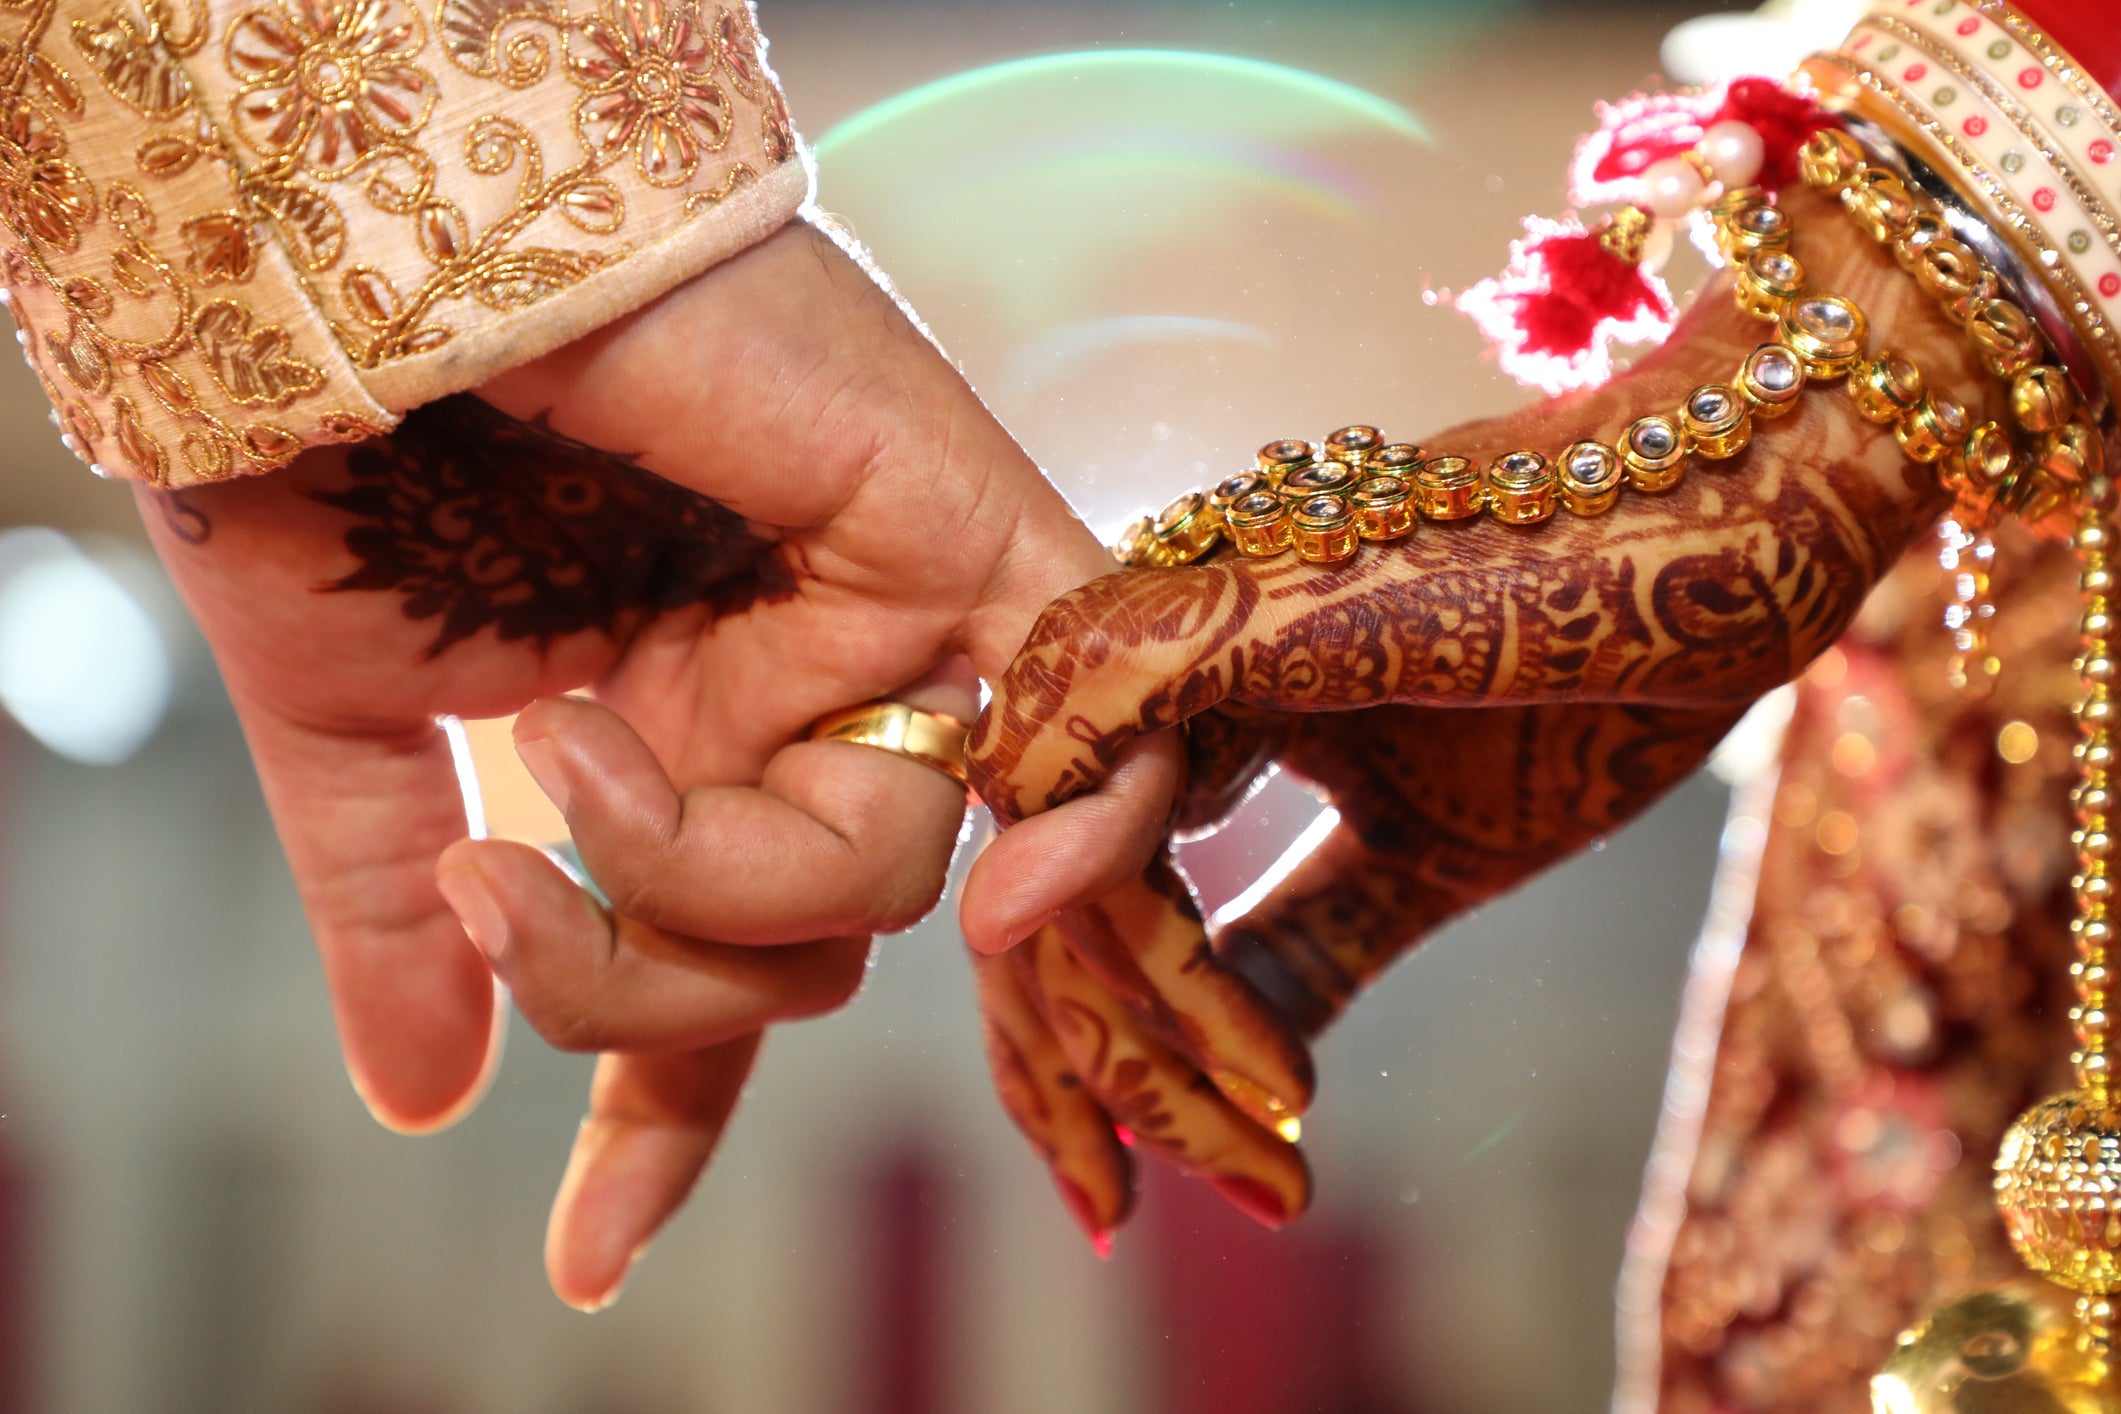 Change coming? India’s supreme court is now hearing arguments in favour of recognising same-sex marriage